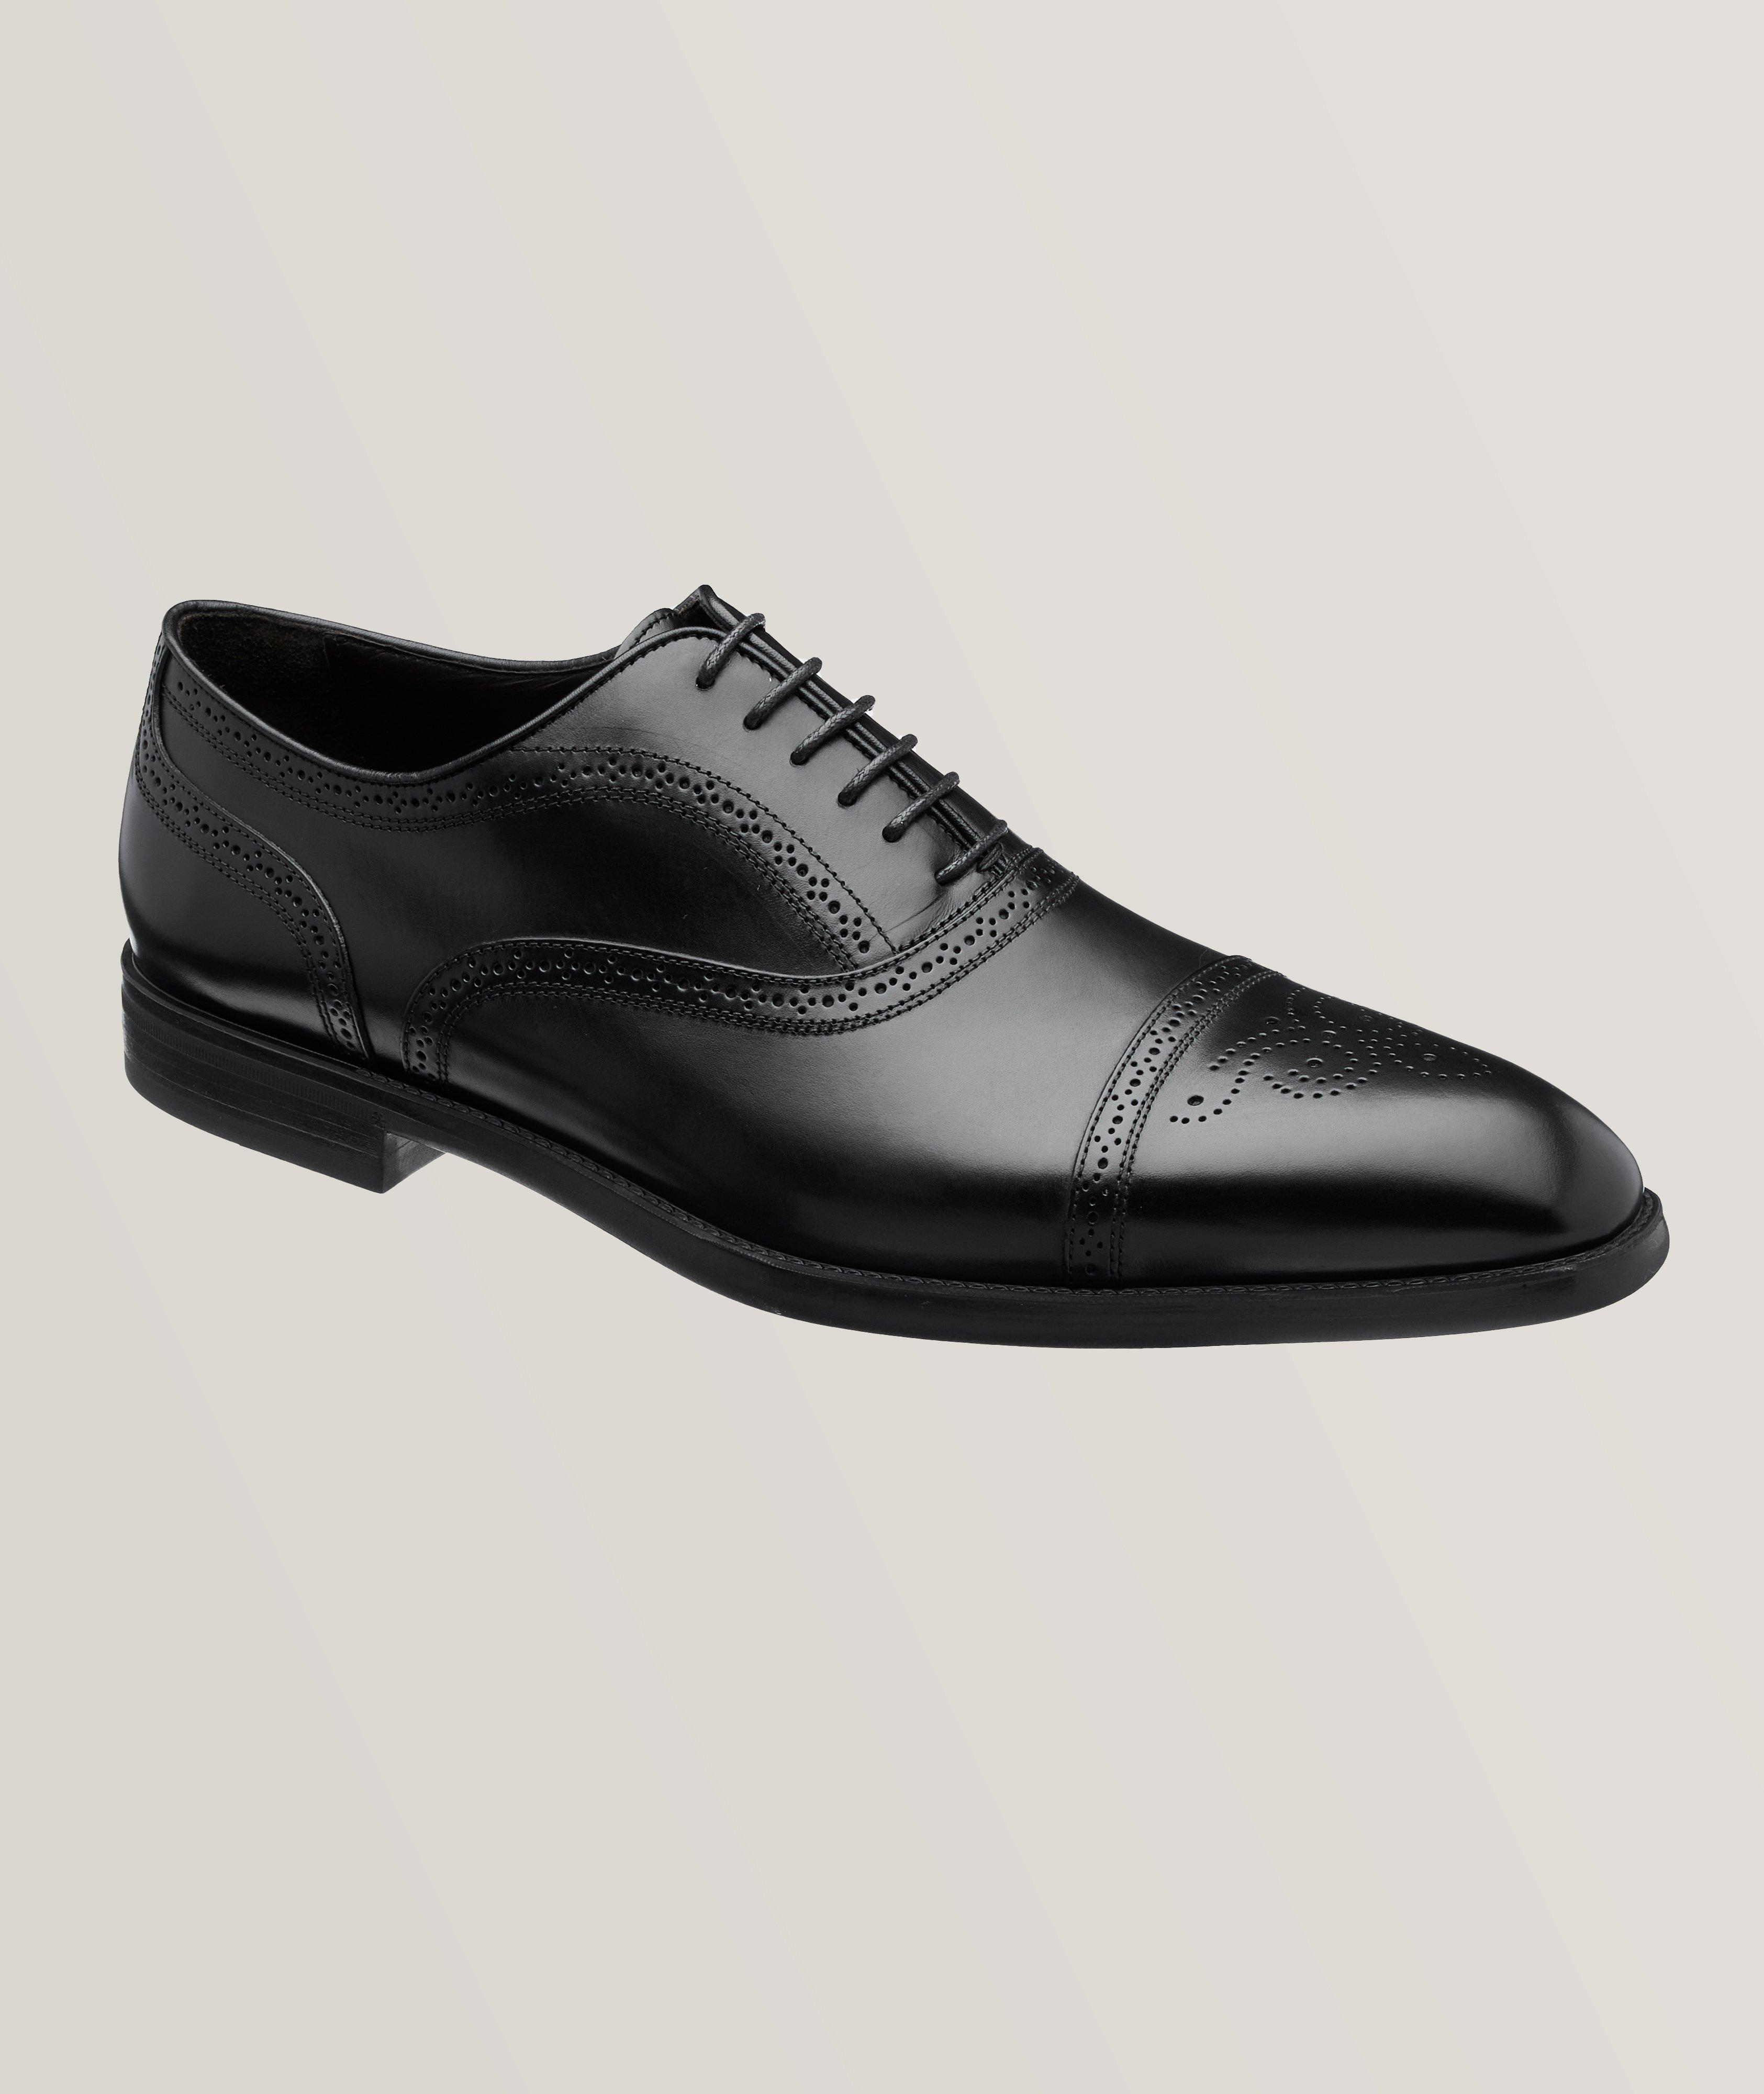 Polished Leather Captoe Phelps Lace Up Brogues image 0